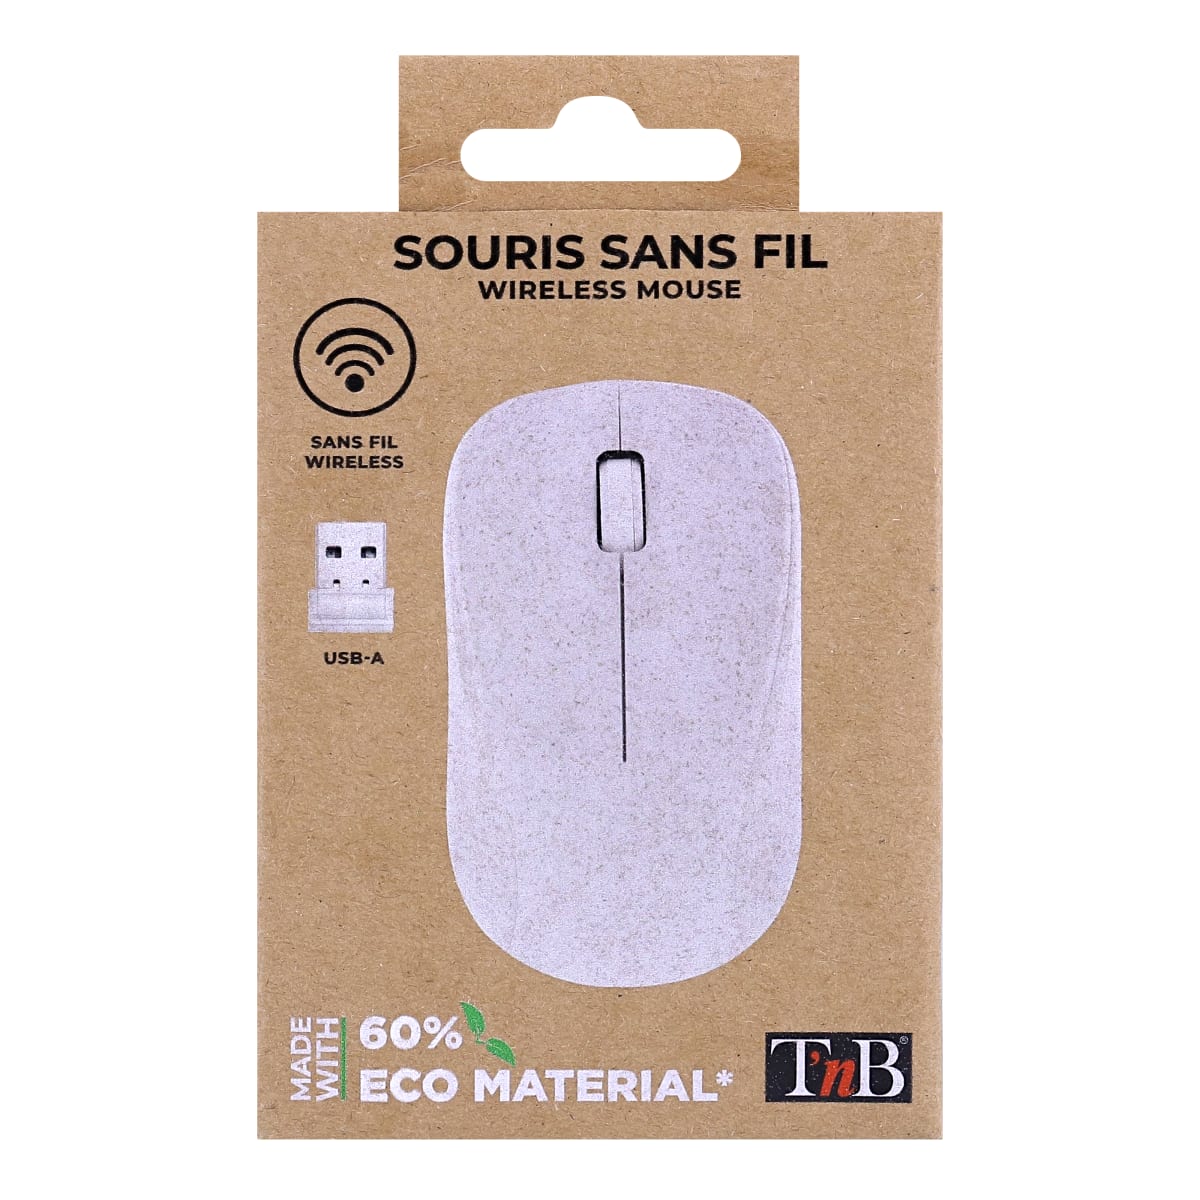 Souris sans fil silicone We Blanche Silicone anti stress 1000 DPI Dongle  USB Plug and Play